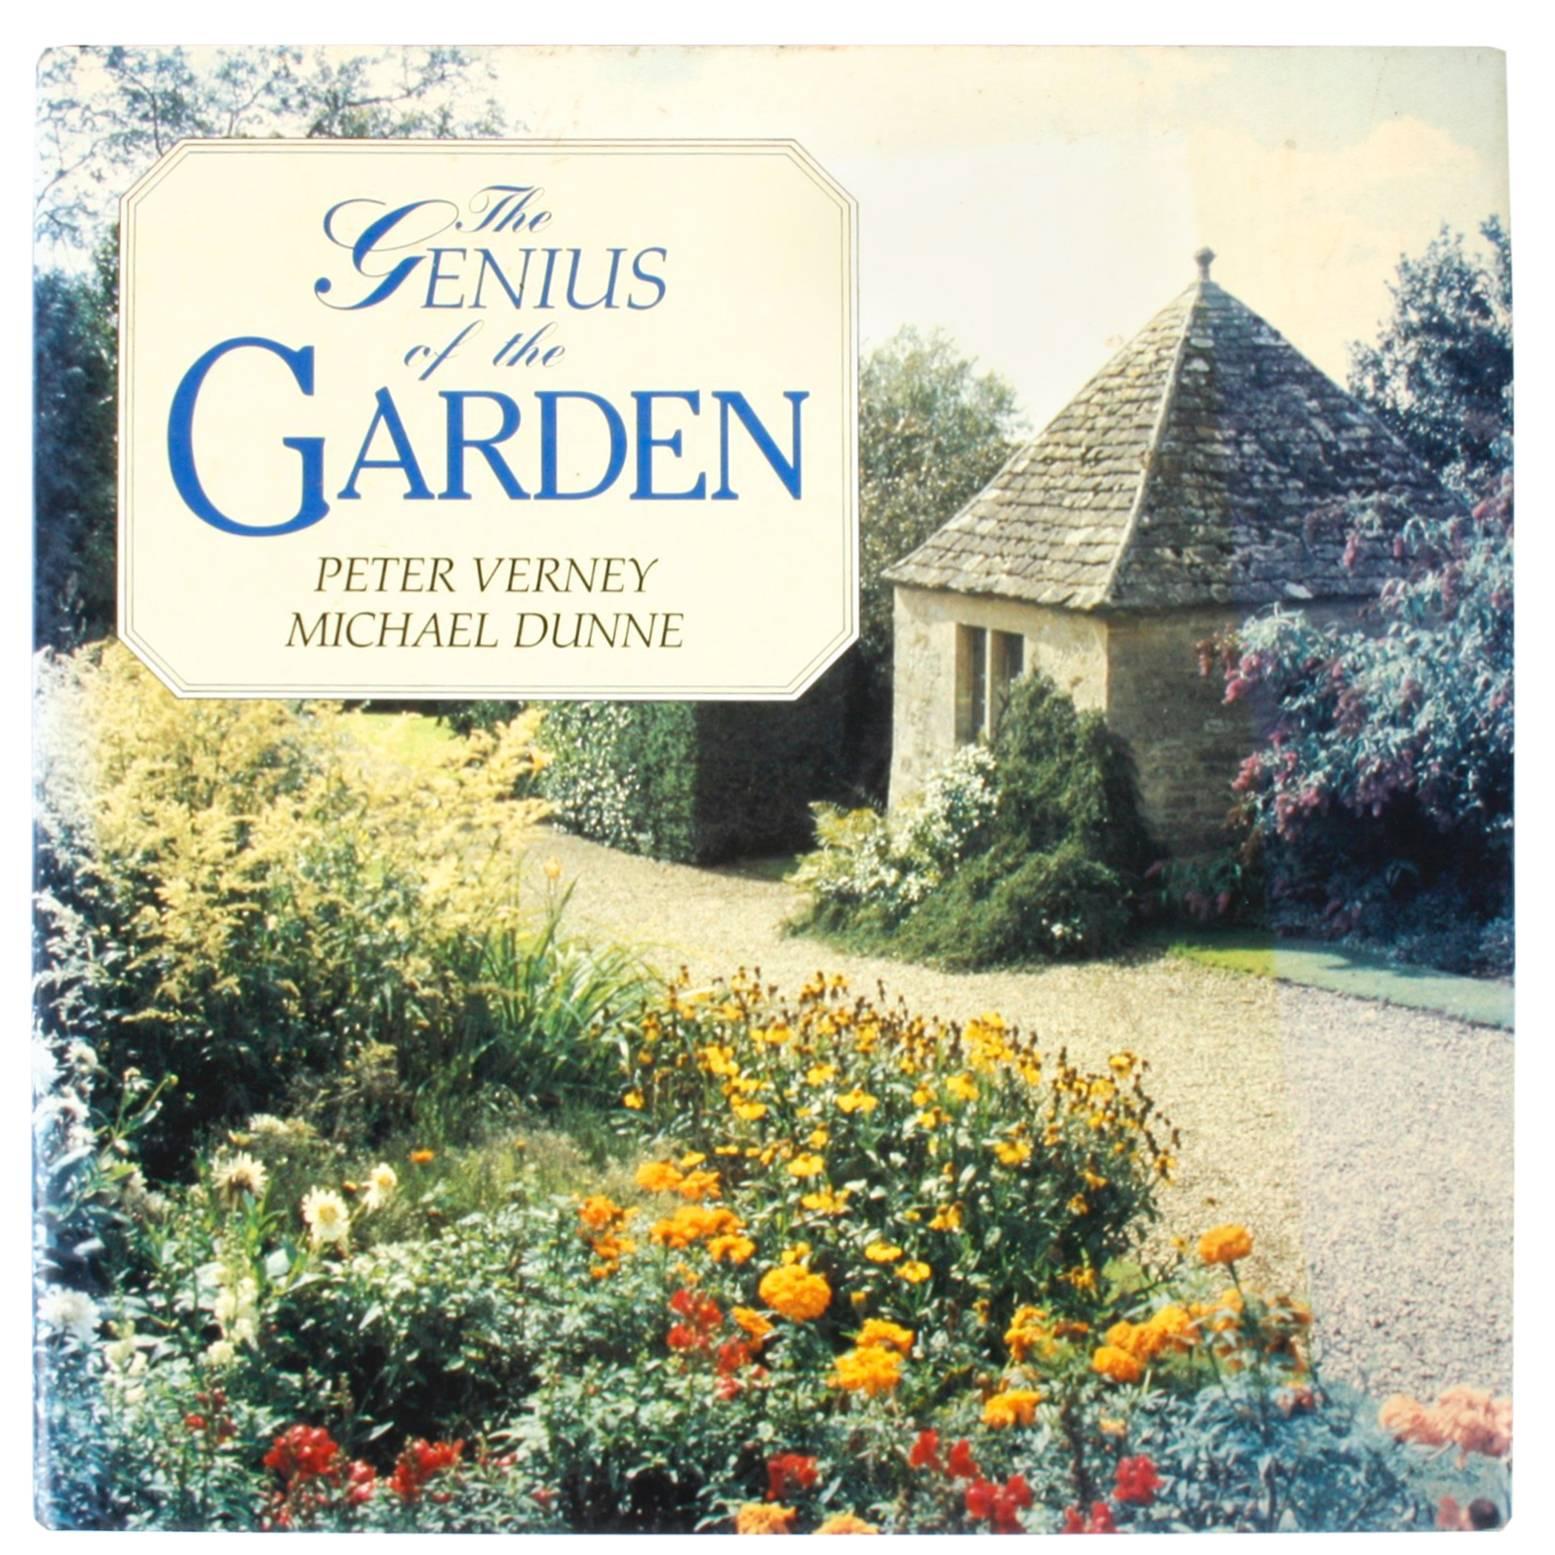 The Genius of the Garden by Peter Verney and Michael Dunne, 1st Edition For Sale